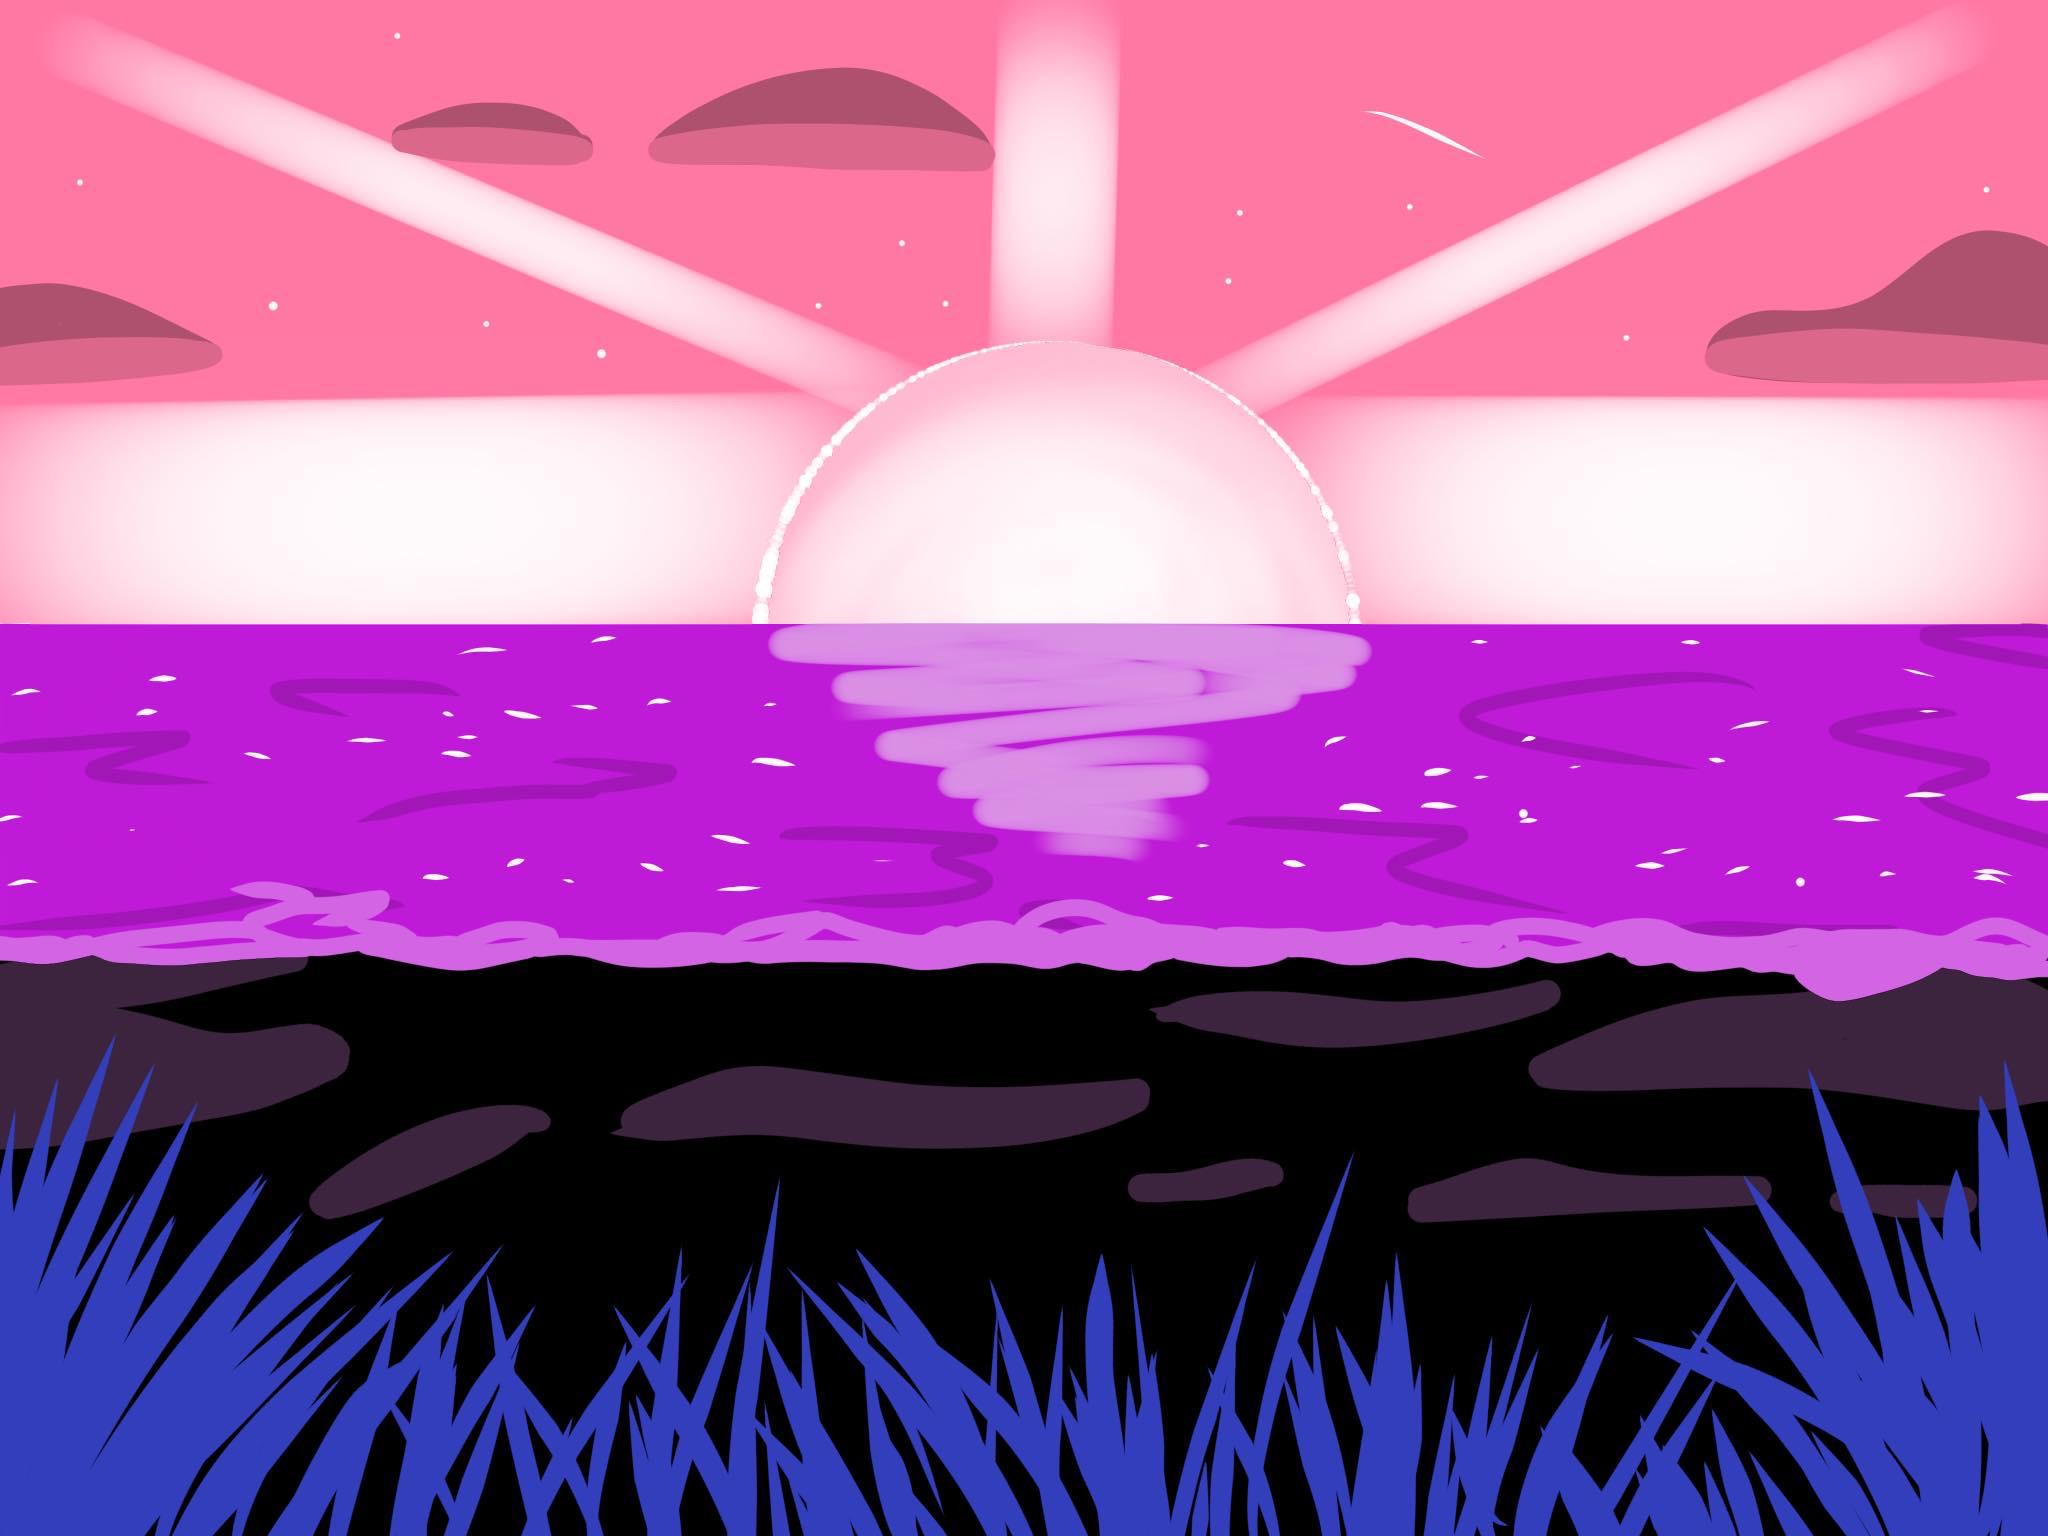 I saw someone drawing the enby flag as a landscape and wanted to try it out so here is the genderfluid flag as a landscape